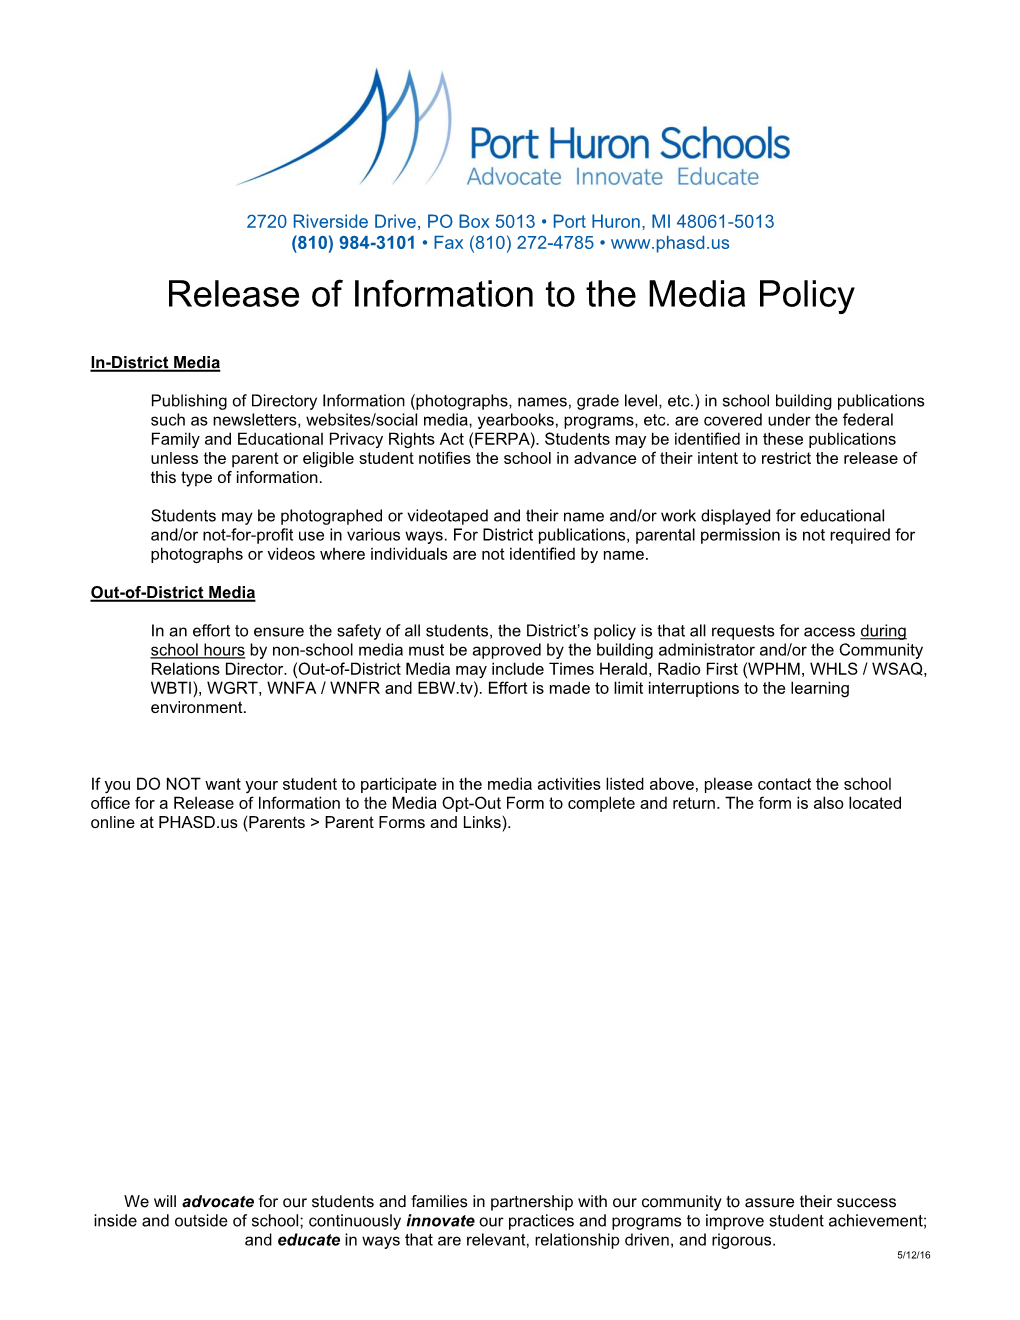 Release of Information to the Media Policy